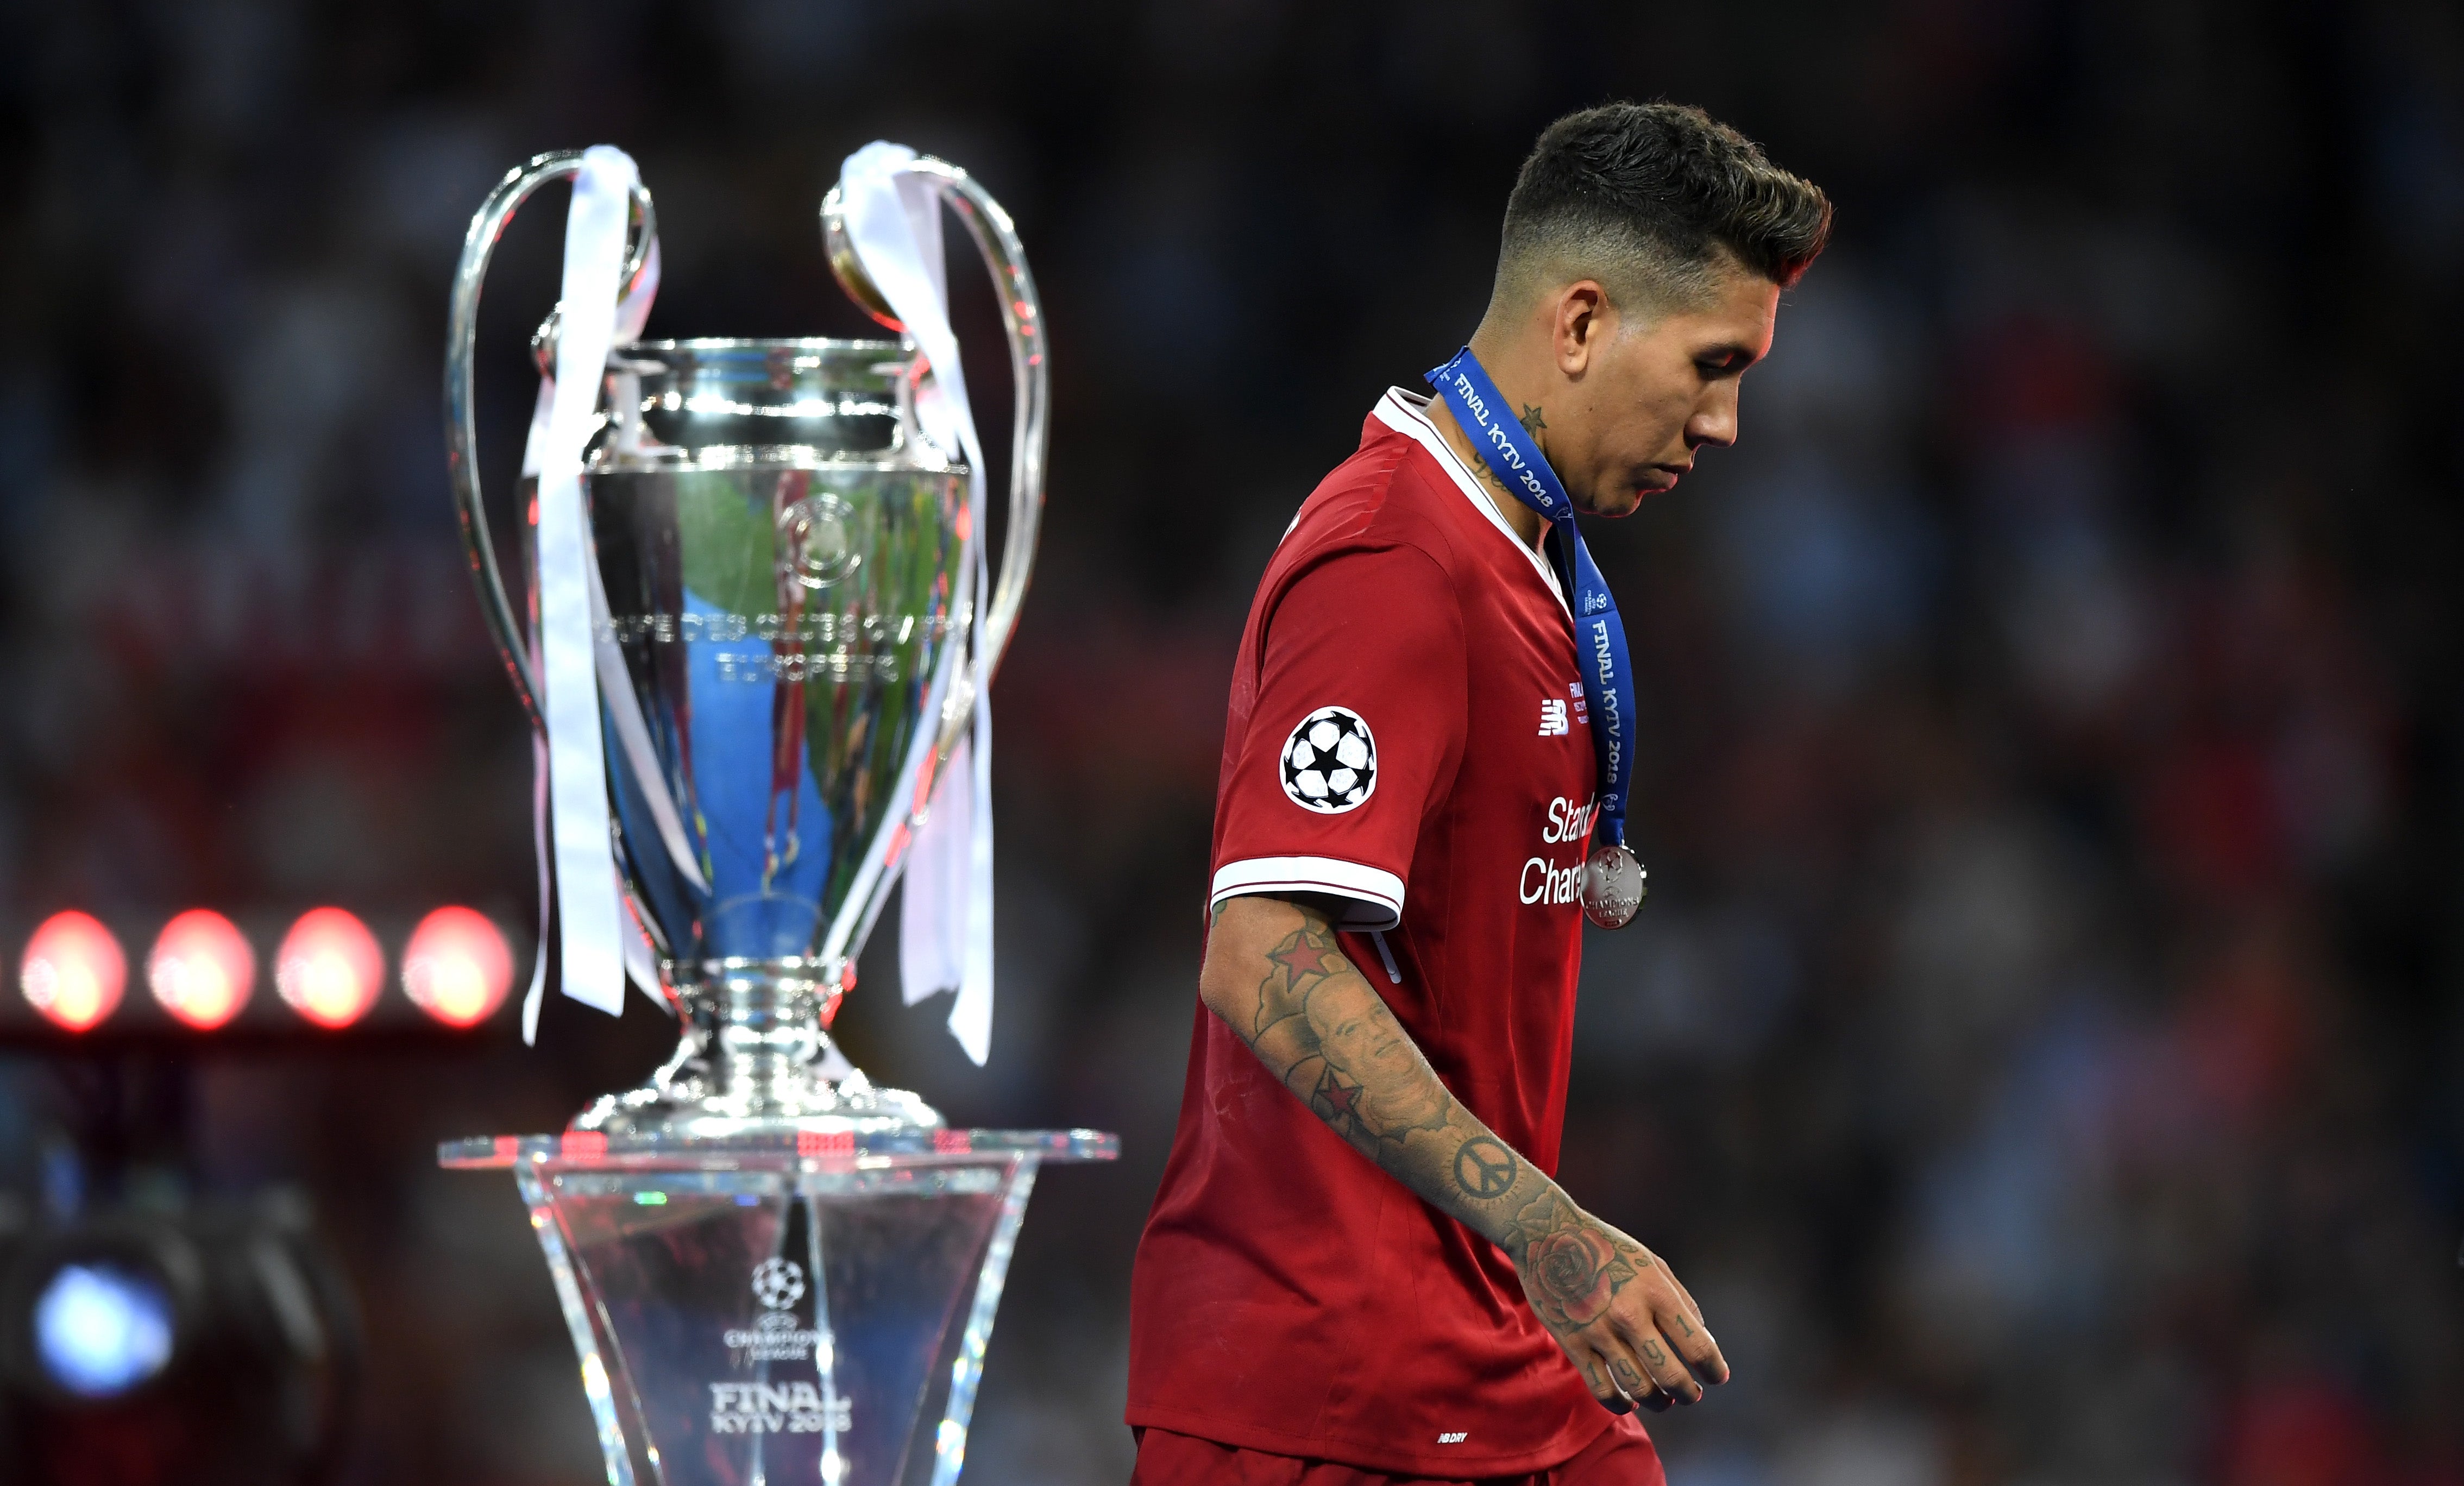 The Champions League trophy evaded Liverpool in 2018’s final, before their 2019 triumph